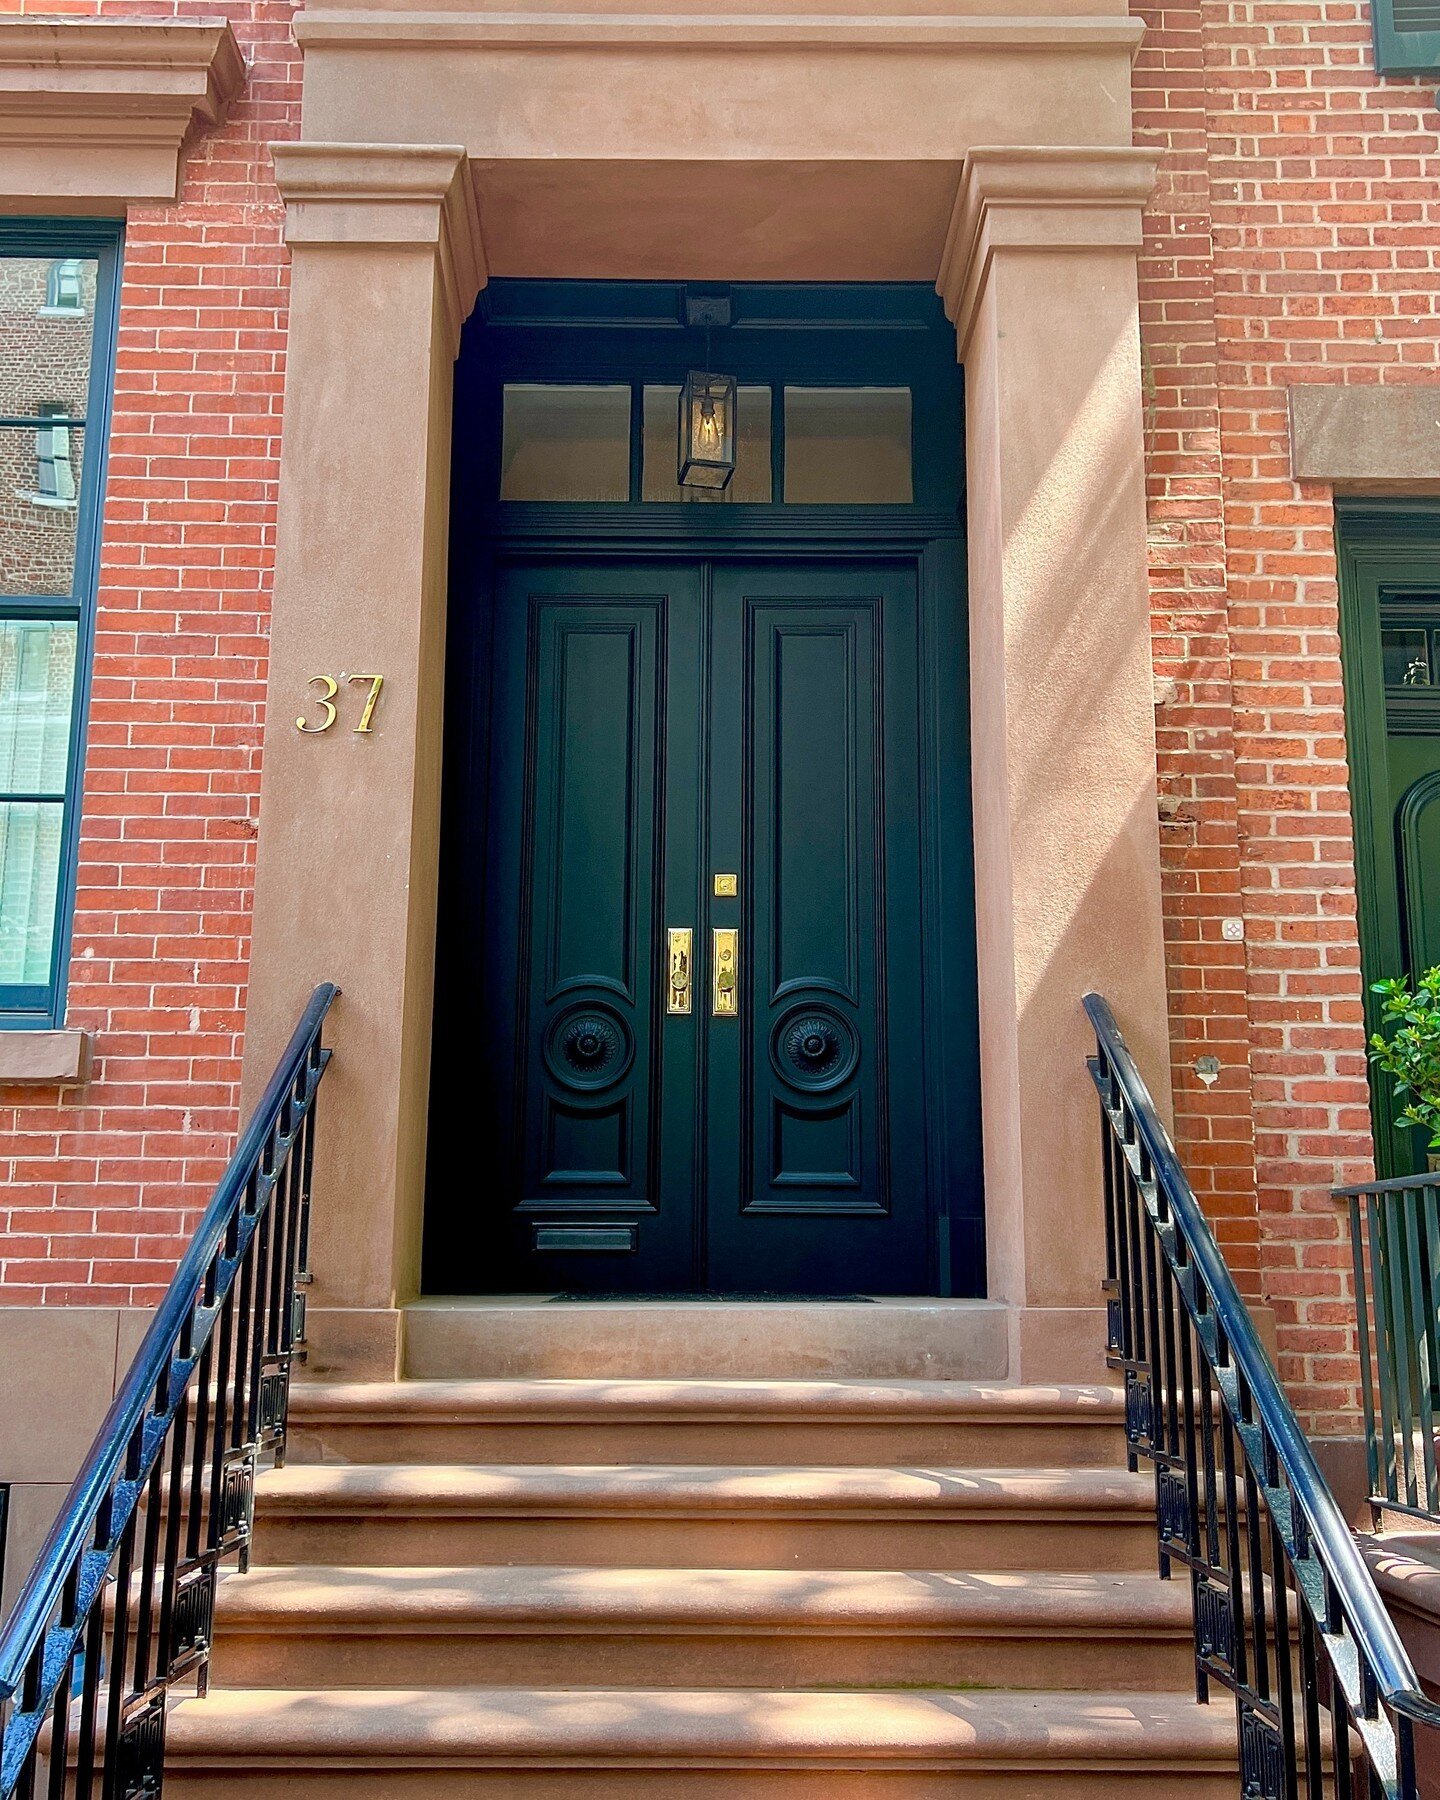 Refined gold accents in the West Village!
🏙️
✨
🗝️
🏡
💁&zwj;♀️
#westvillage #thevillage #luxurynyc #luxury #luxuryapartments #manhattan #nyc #wsp #nycapartments #nycbroker #listing #selling #buying #househunting #curbappeal #manhattan #buyers #autu